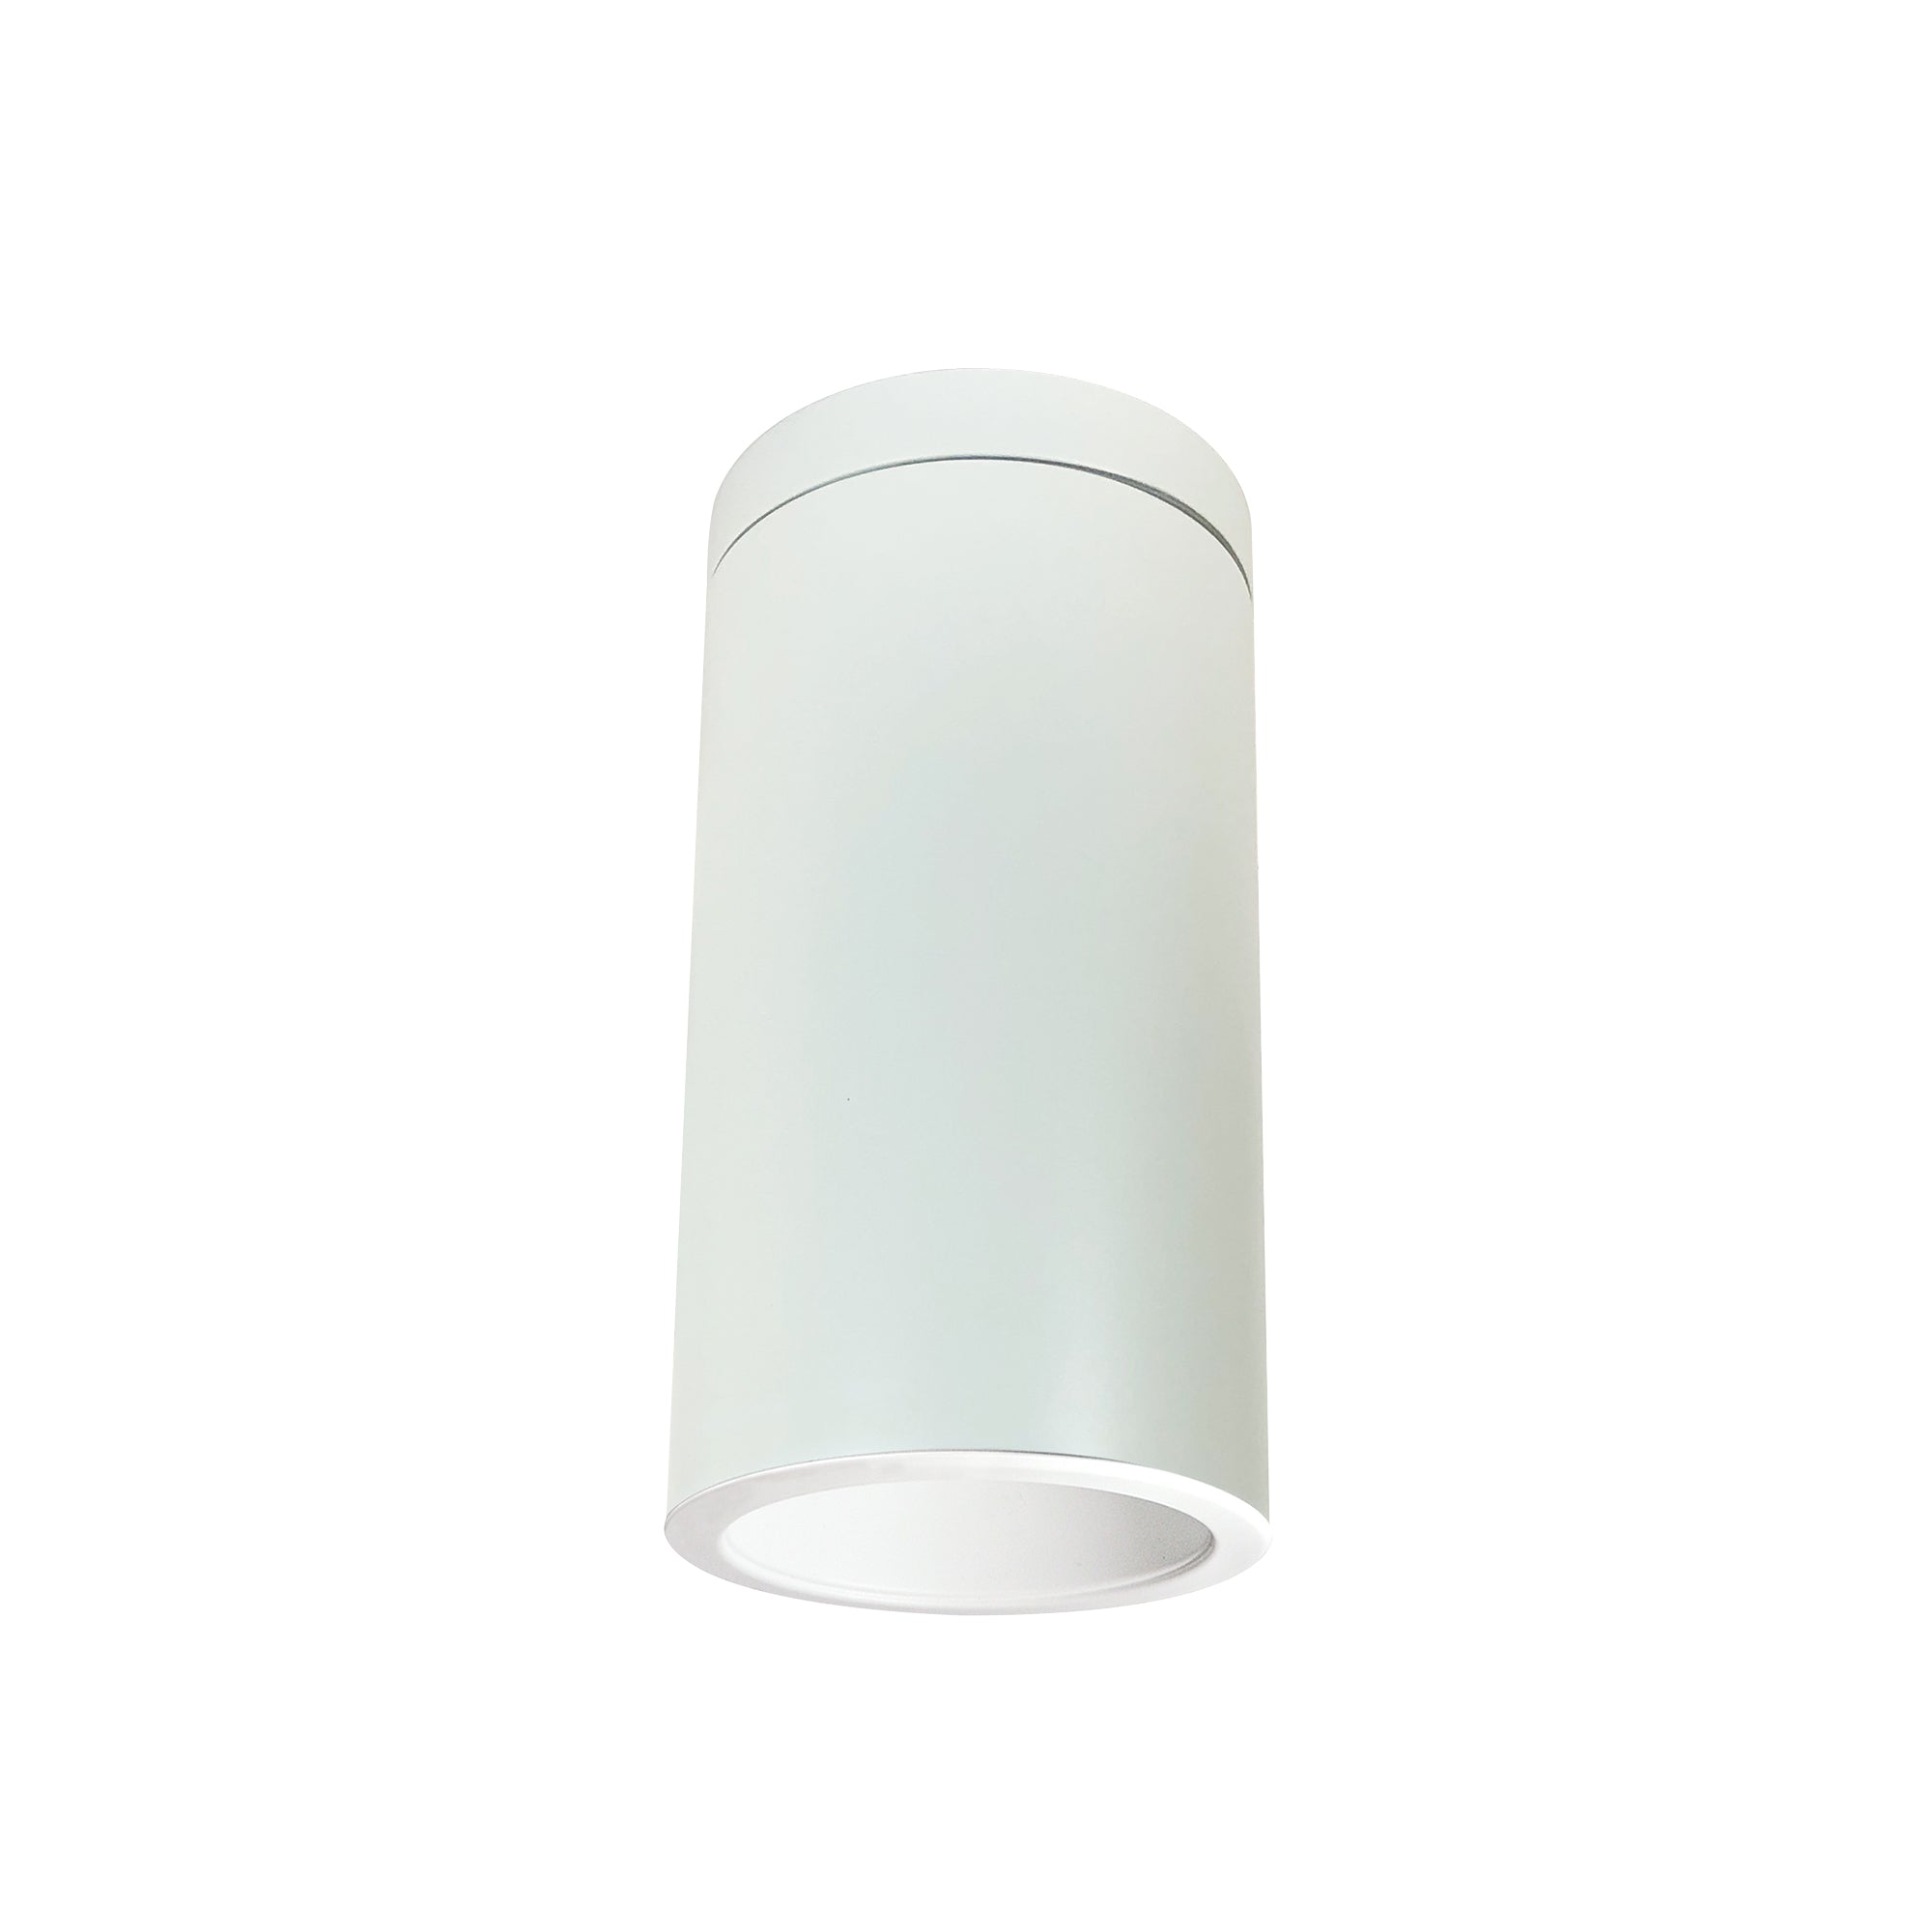 Nora Lighting NYLI-6SI1WWW - Cylinder - 6 Inch Cylinder, White, Surface Mount, Incandescent, Refl., White